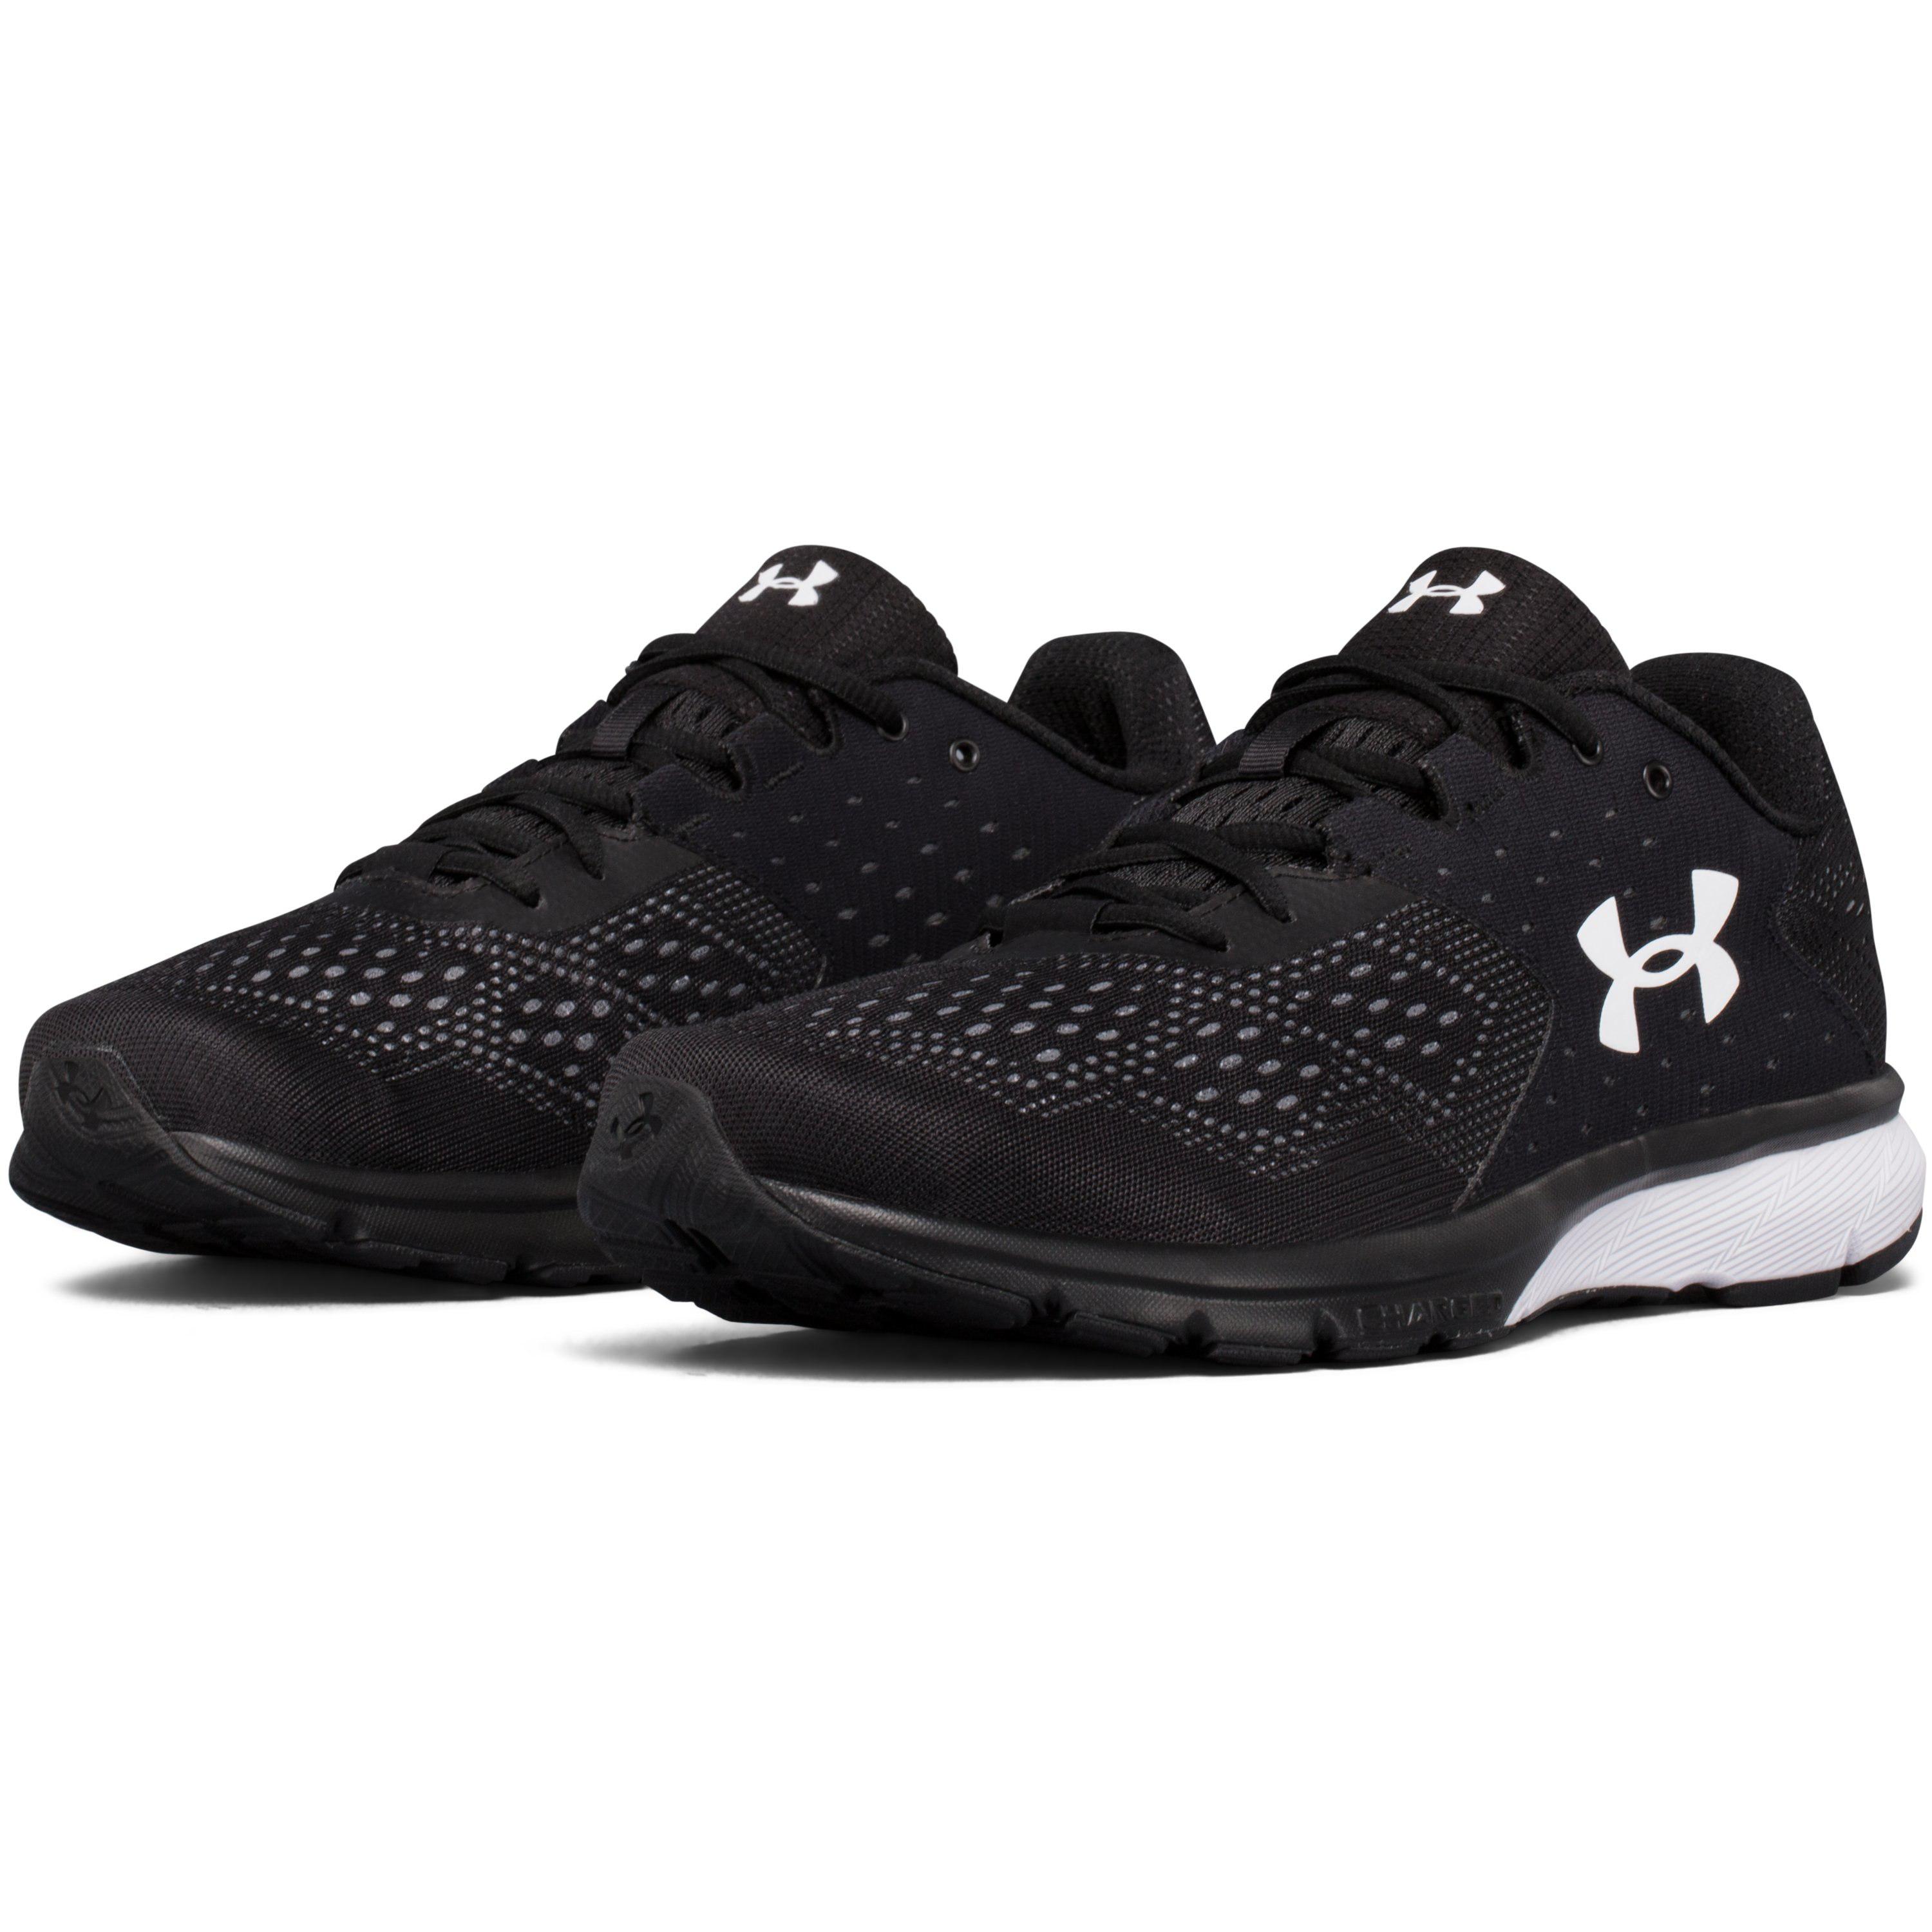 Under Armour Rubber Men's Ua Charged Rebel – Wide (2e) Running Shoes in